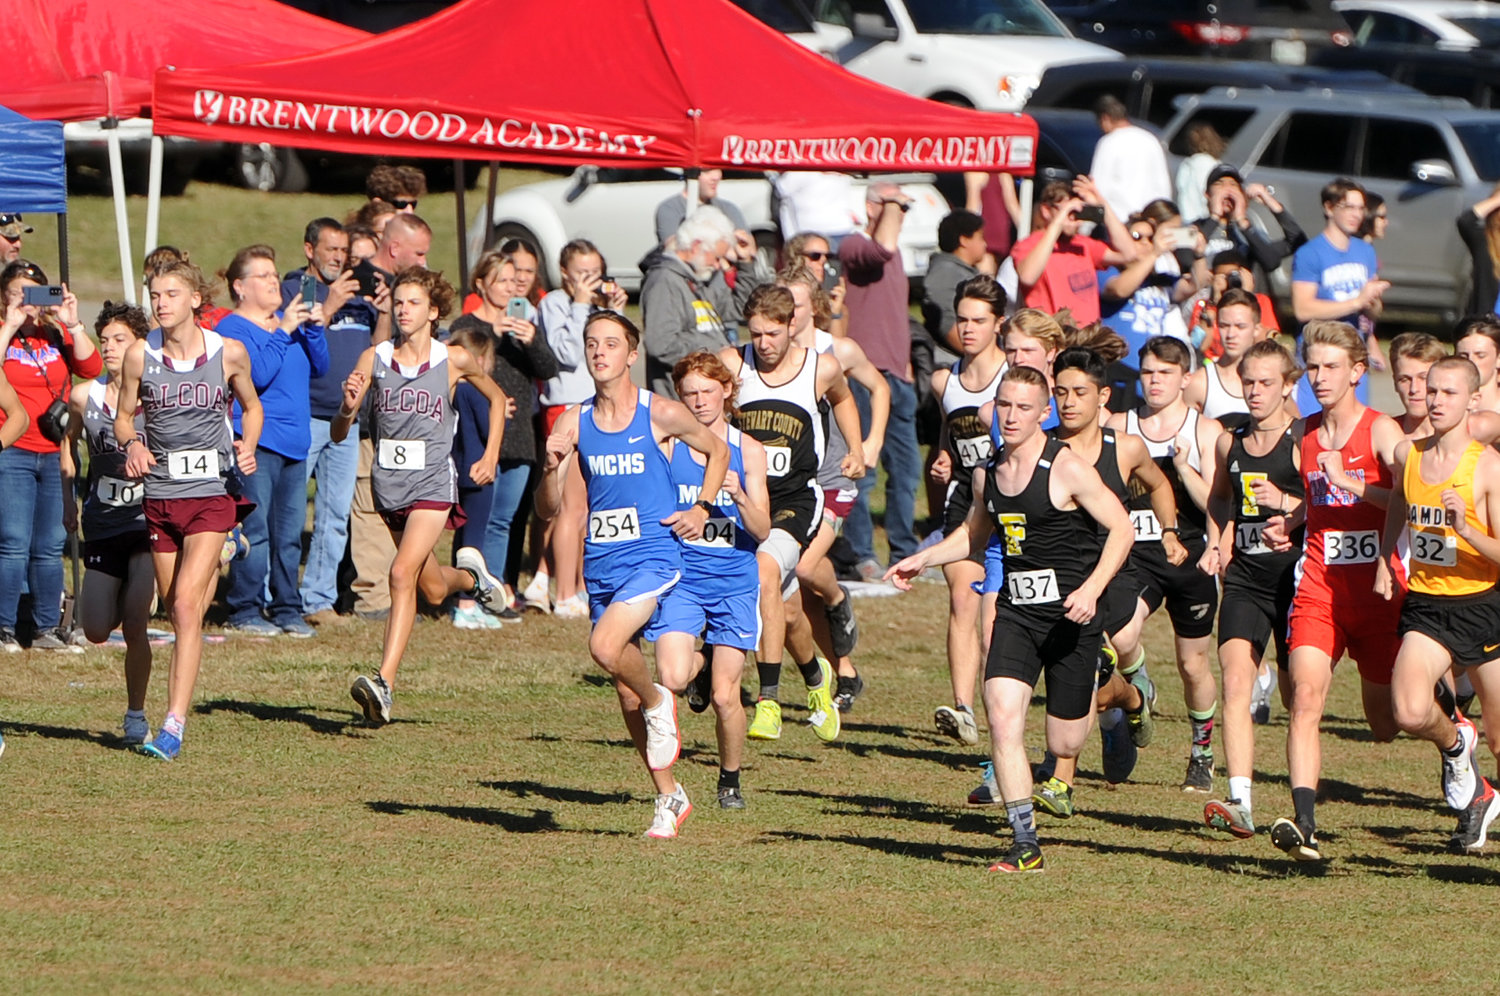 The Marshall County Tigers sprint out to start the race and battle for early position in the Boys Class A-AA race.